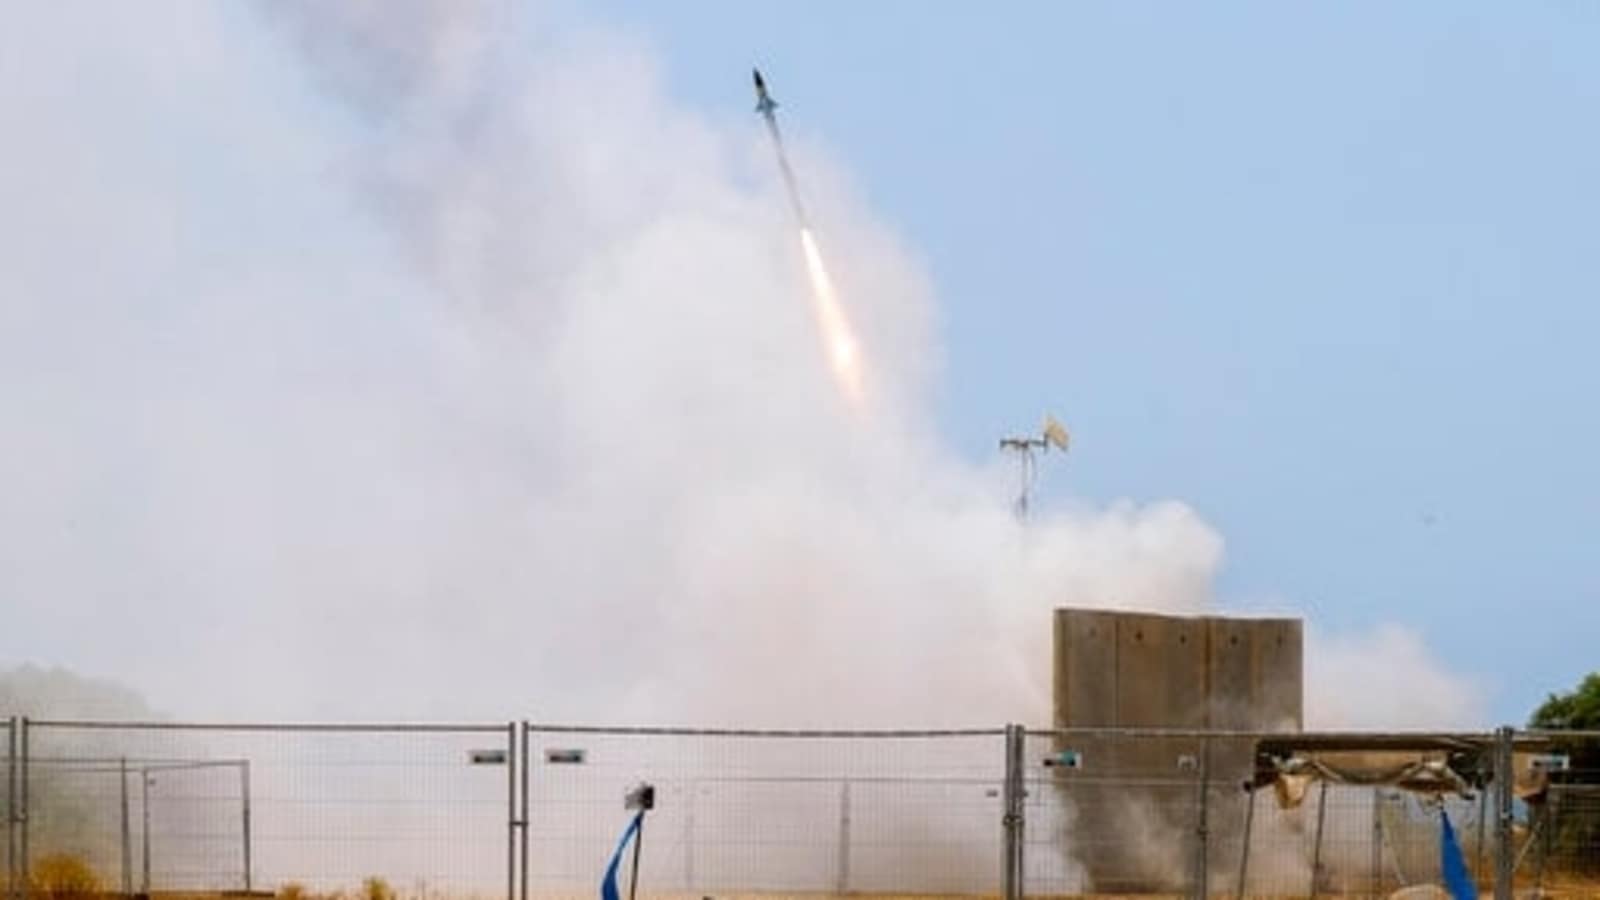 After Iron Dome, Israel plans 'laser wall' to intercept missiles: What is it?